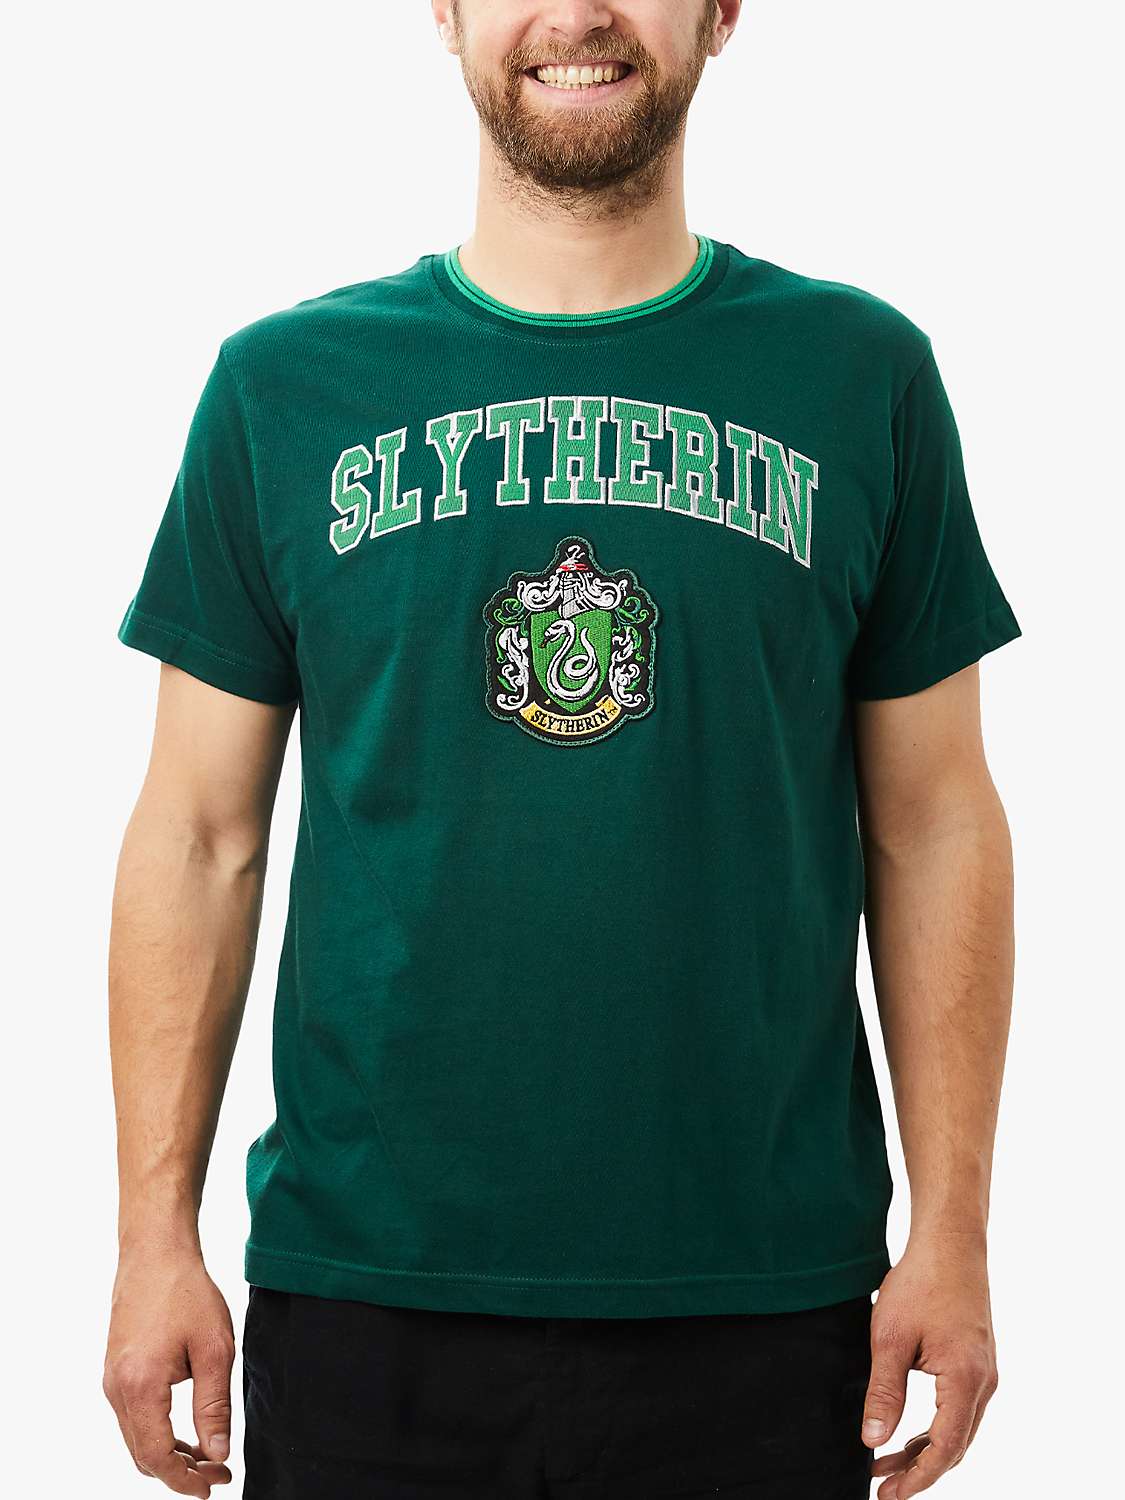 Buy Fabric Flavours Harry Potter Slytherin House T-Shirt, Green Online at johnlewis.com